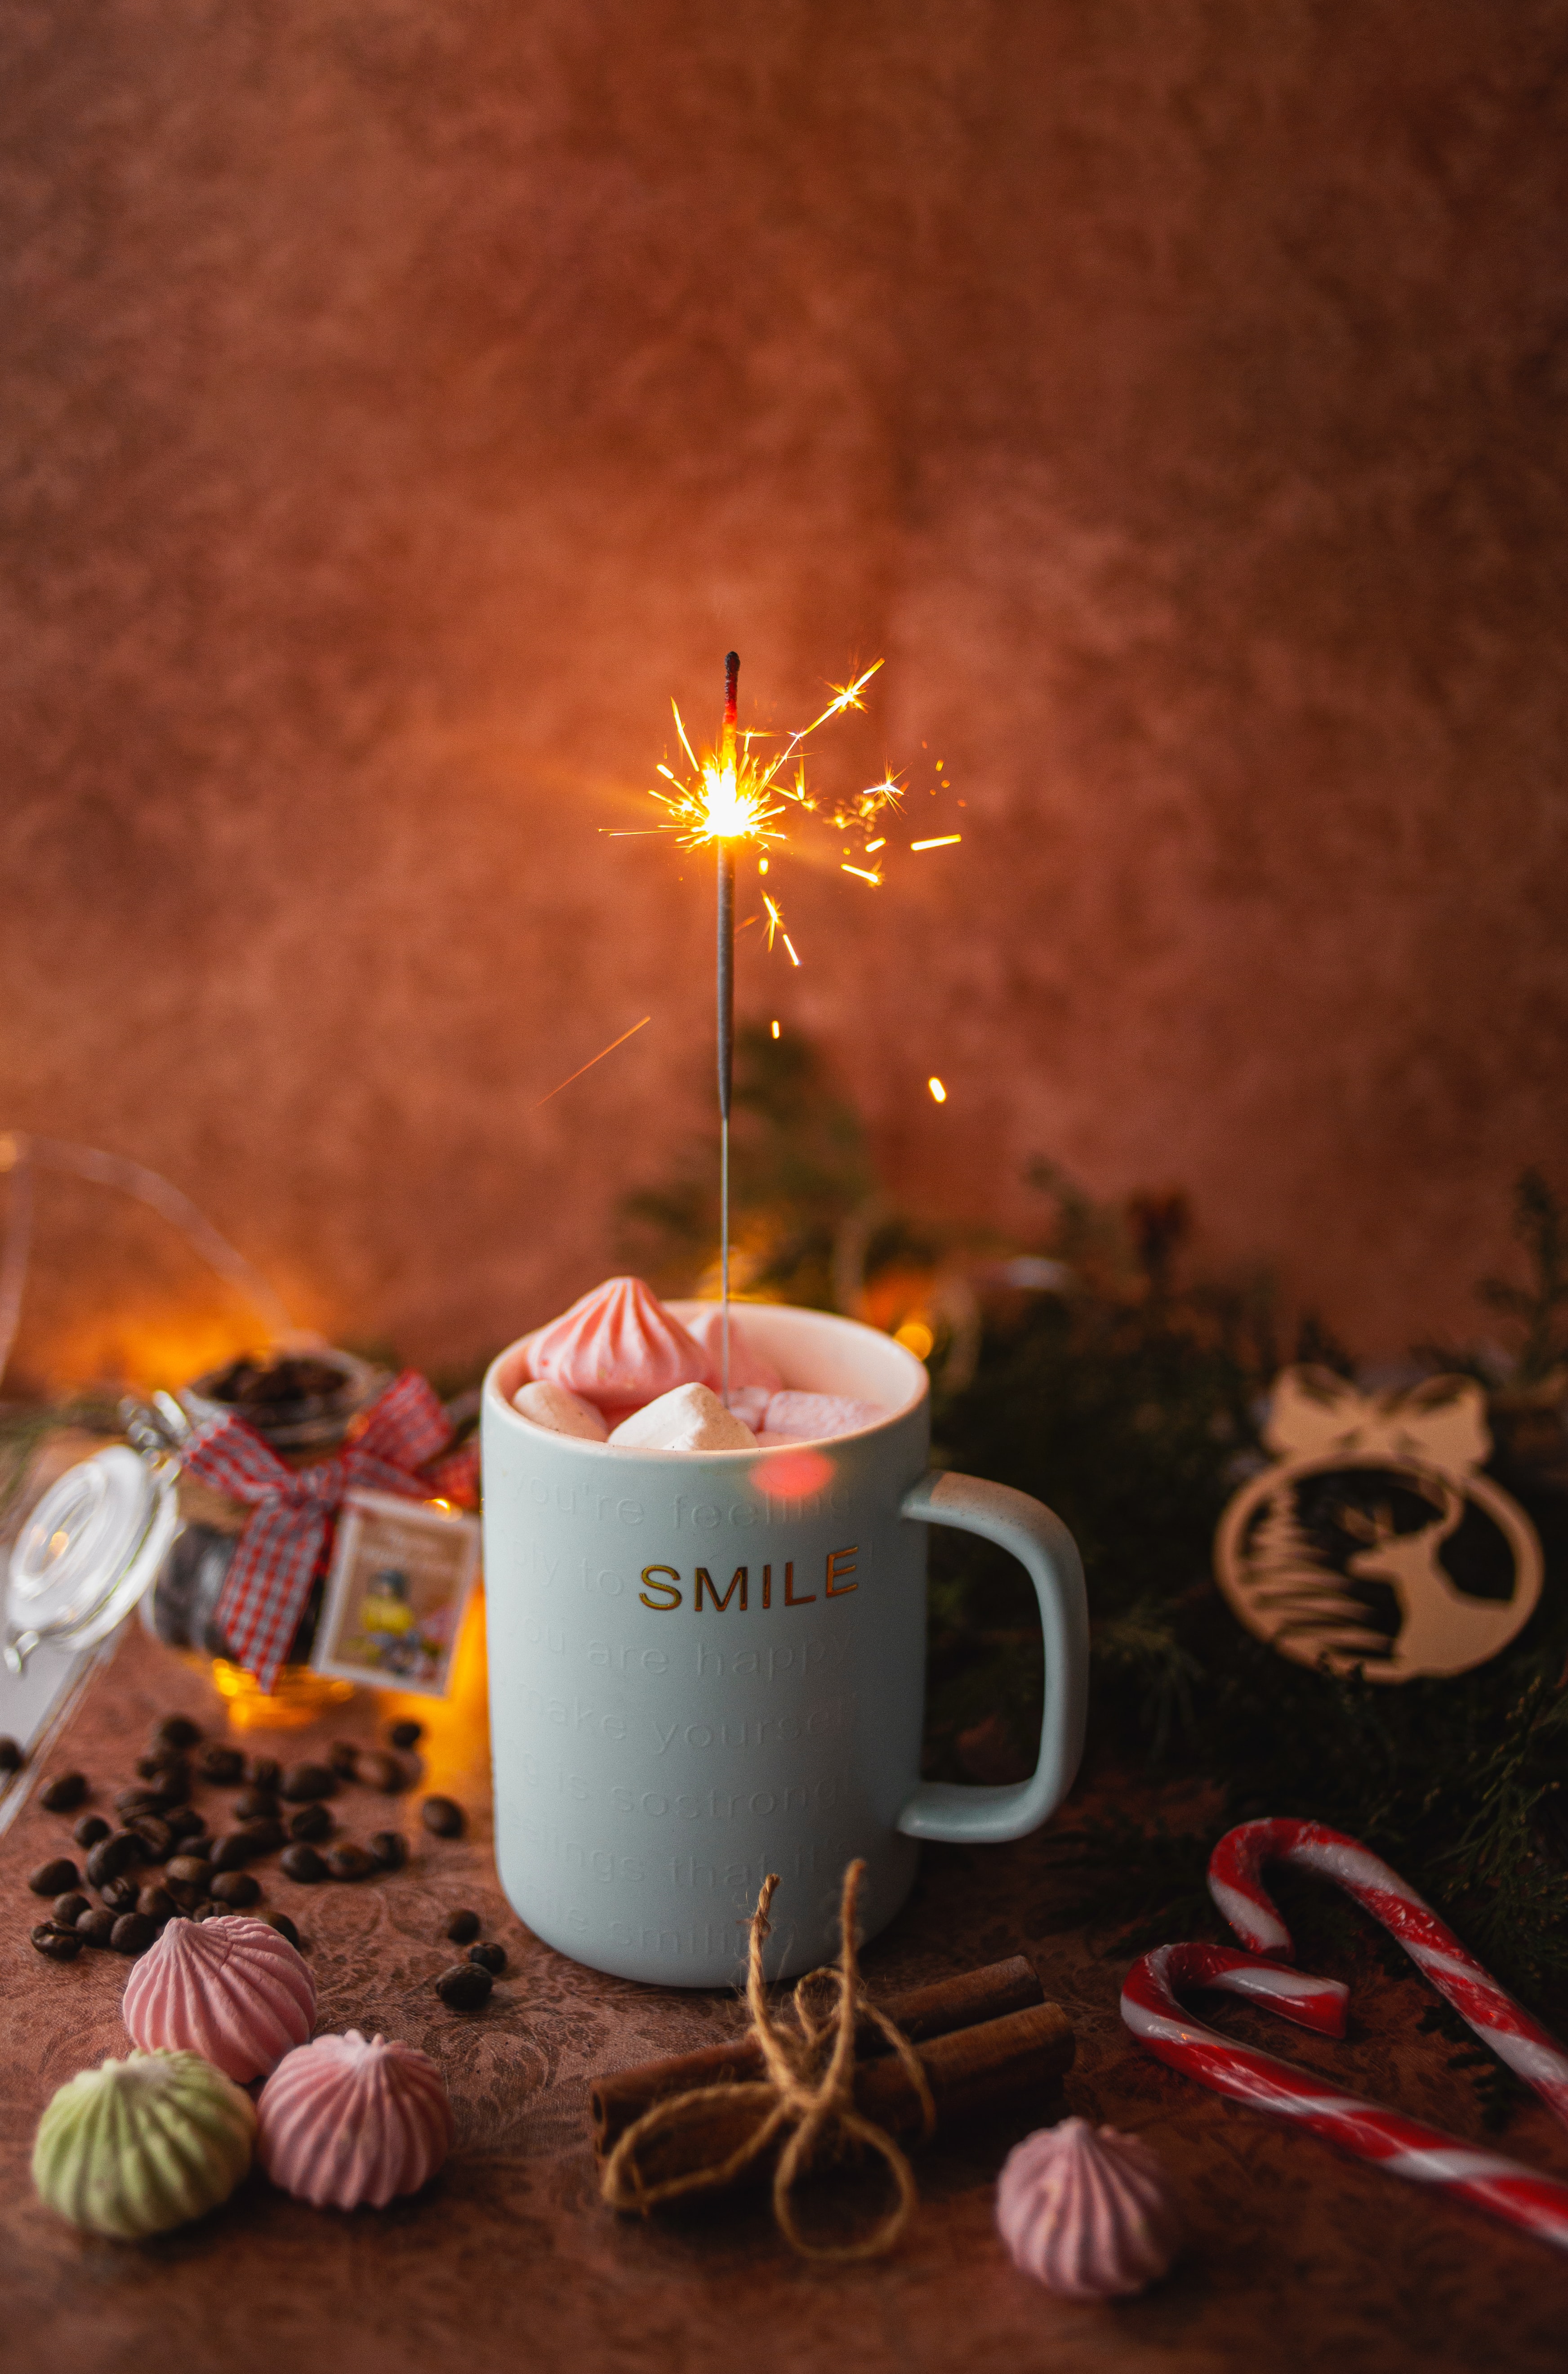 miscellanea, mug, holiday, sparks, cup, miscellaneous, marshmallow, bengal lights, sparklers, zephyr